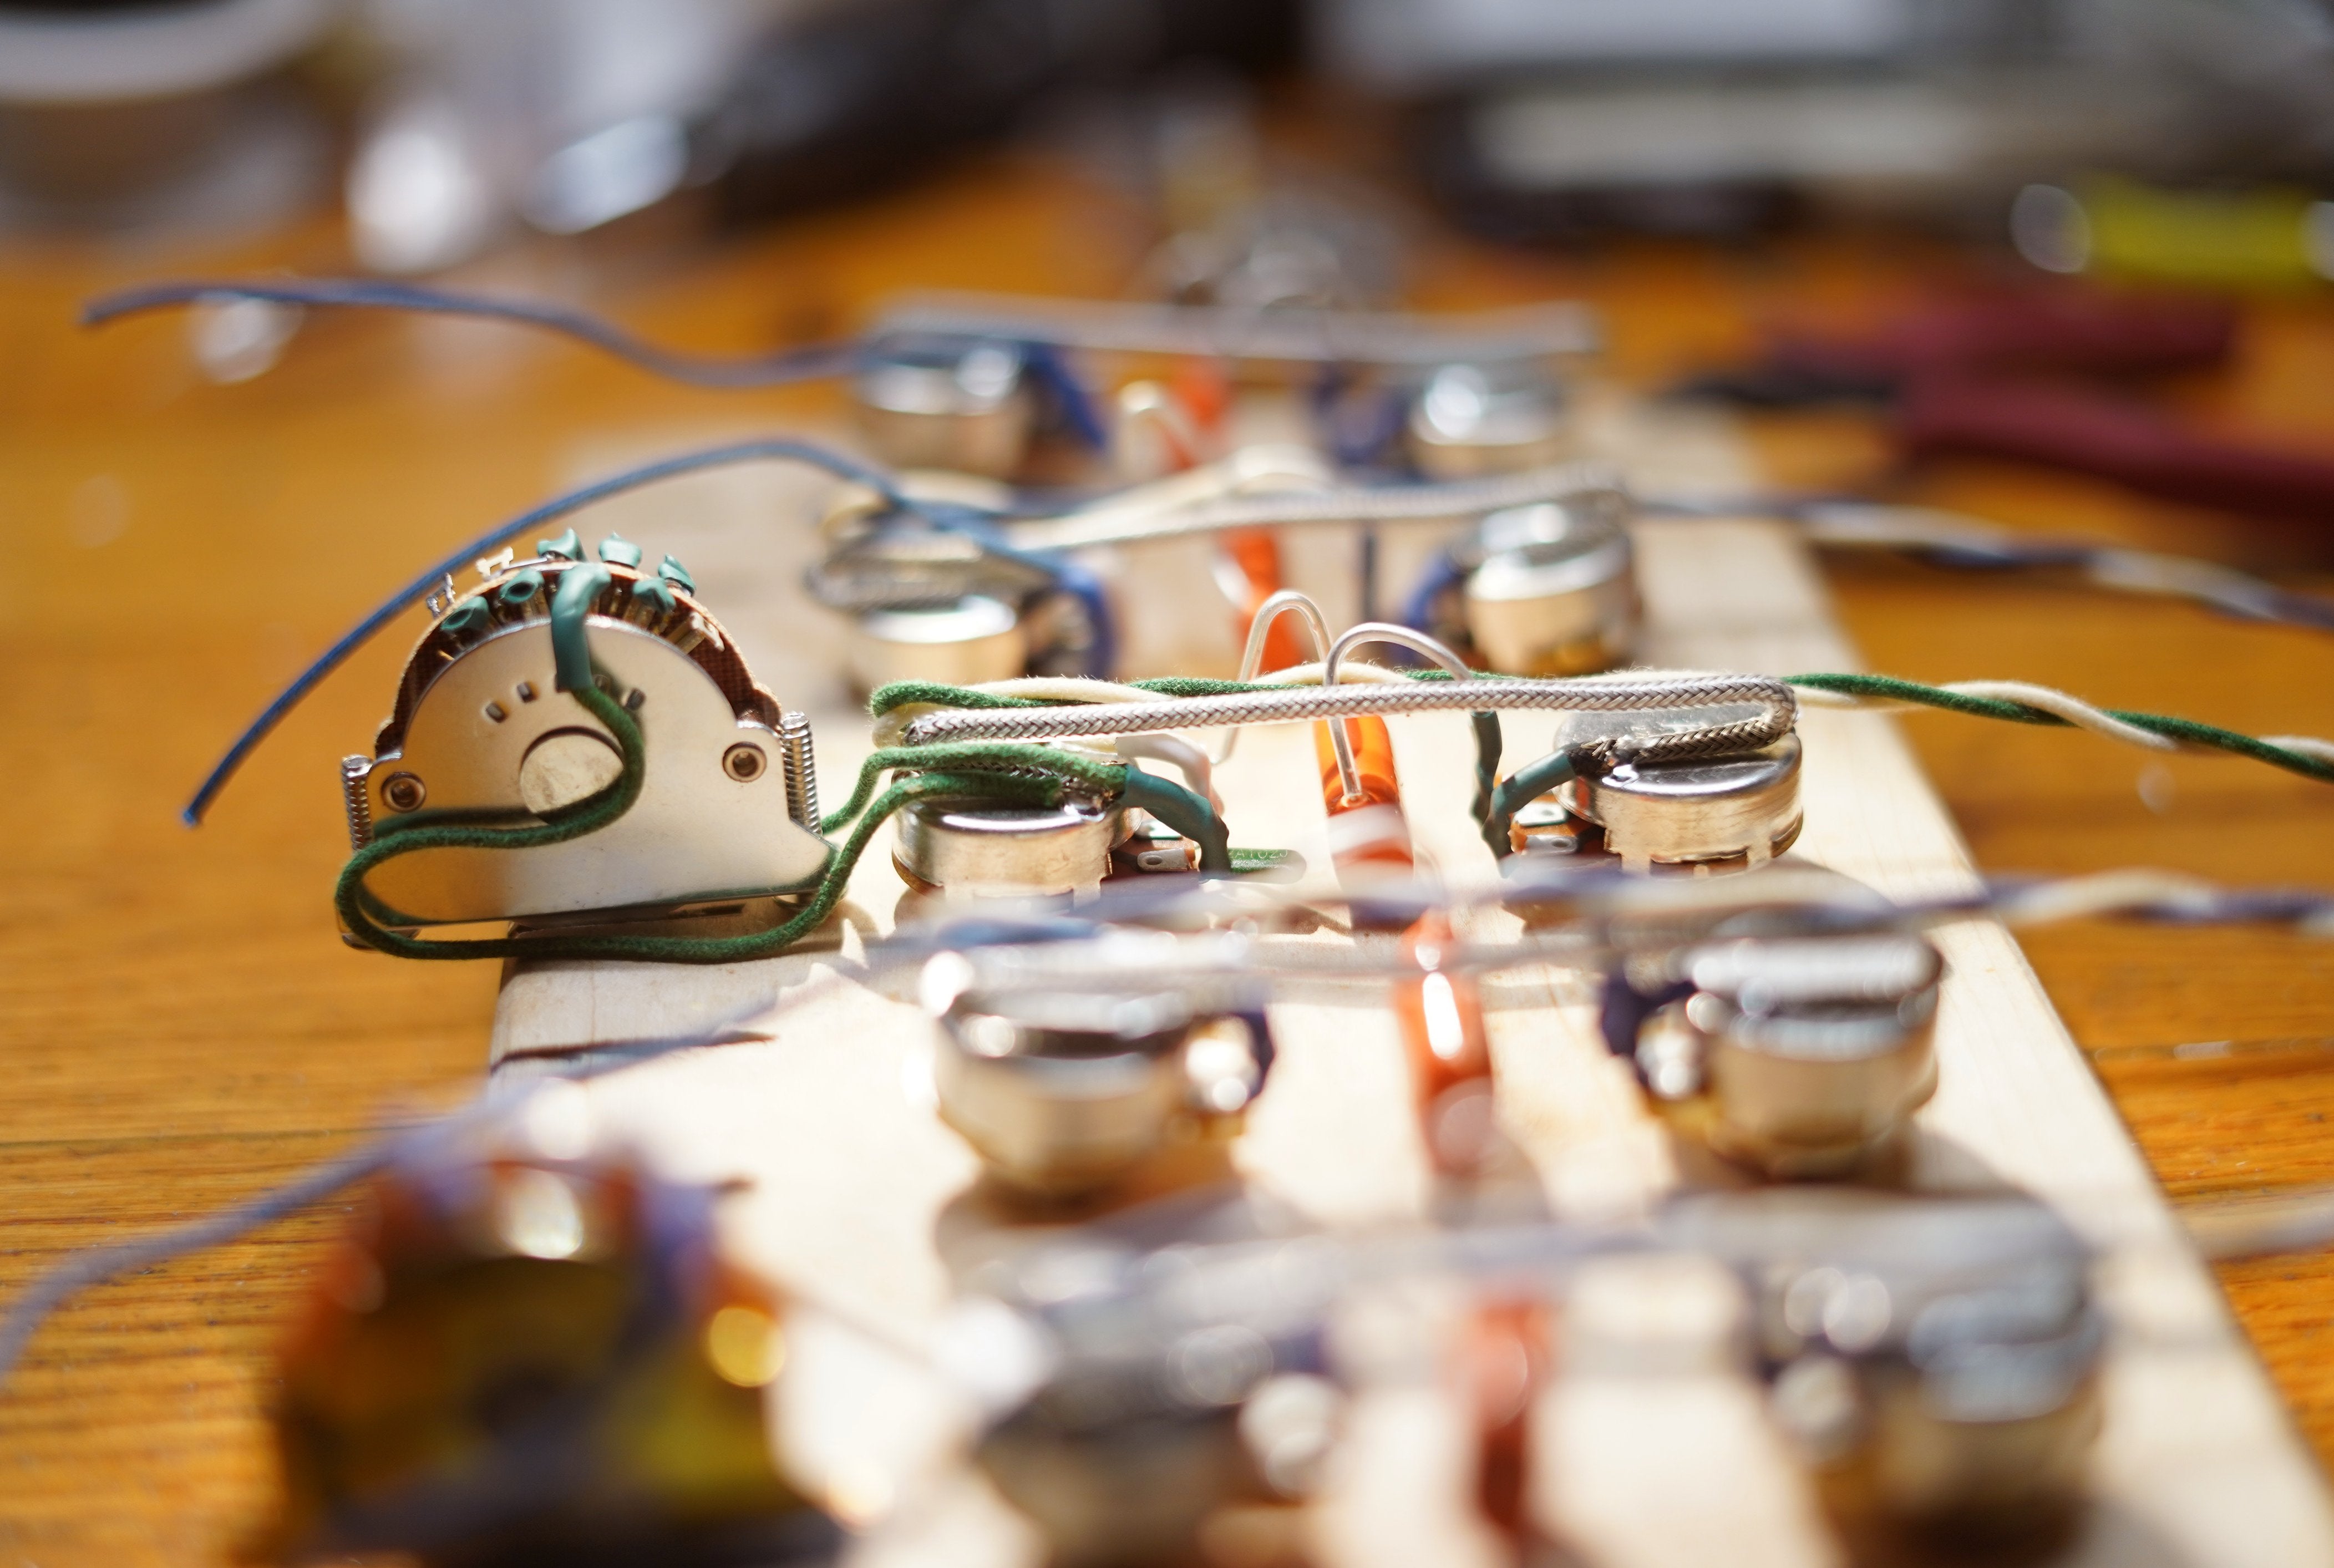 5 Telecaster Wiring kits being built